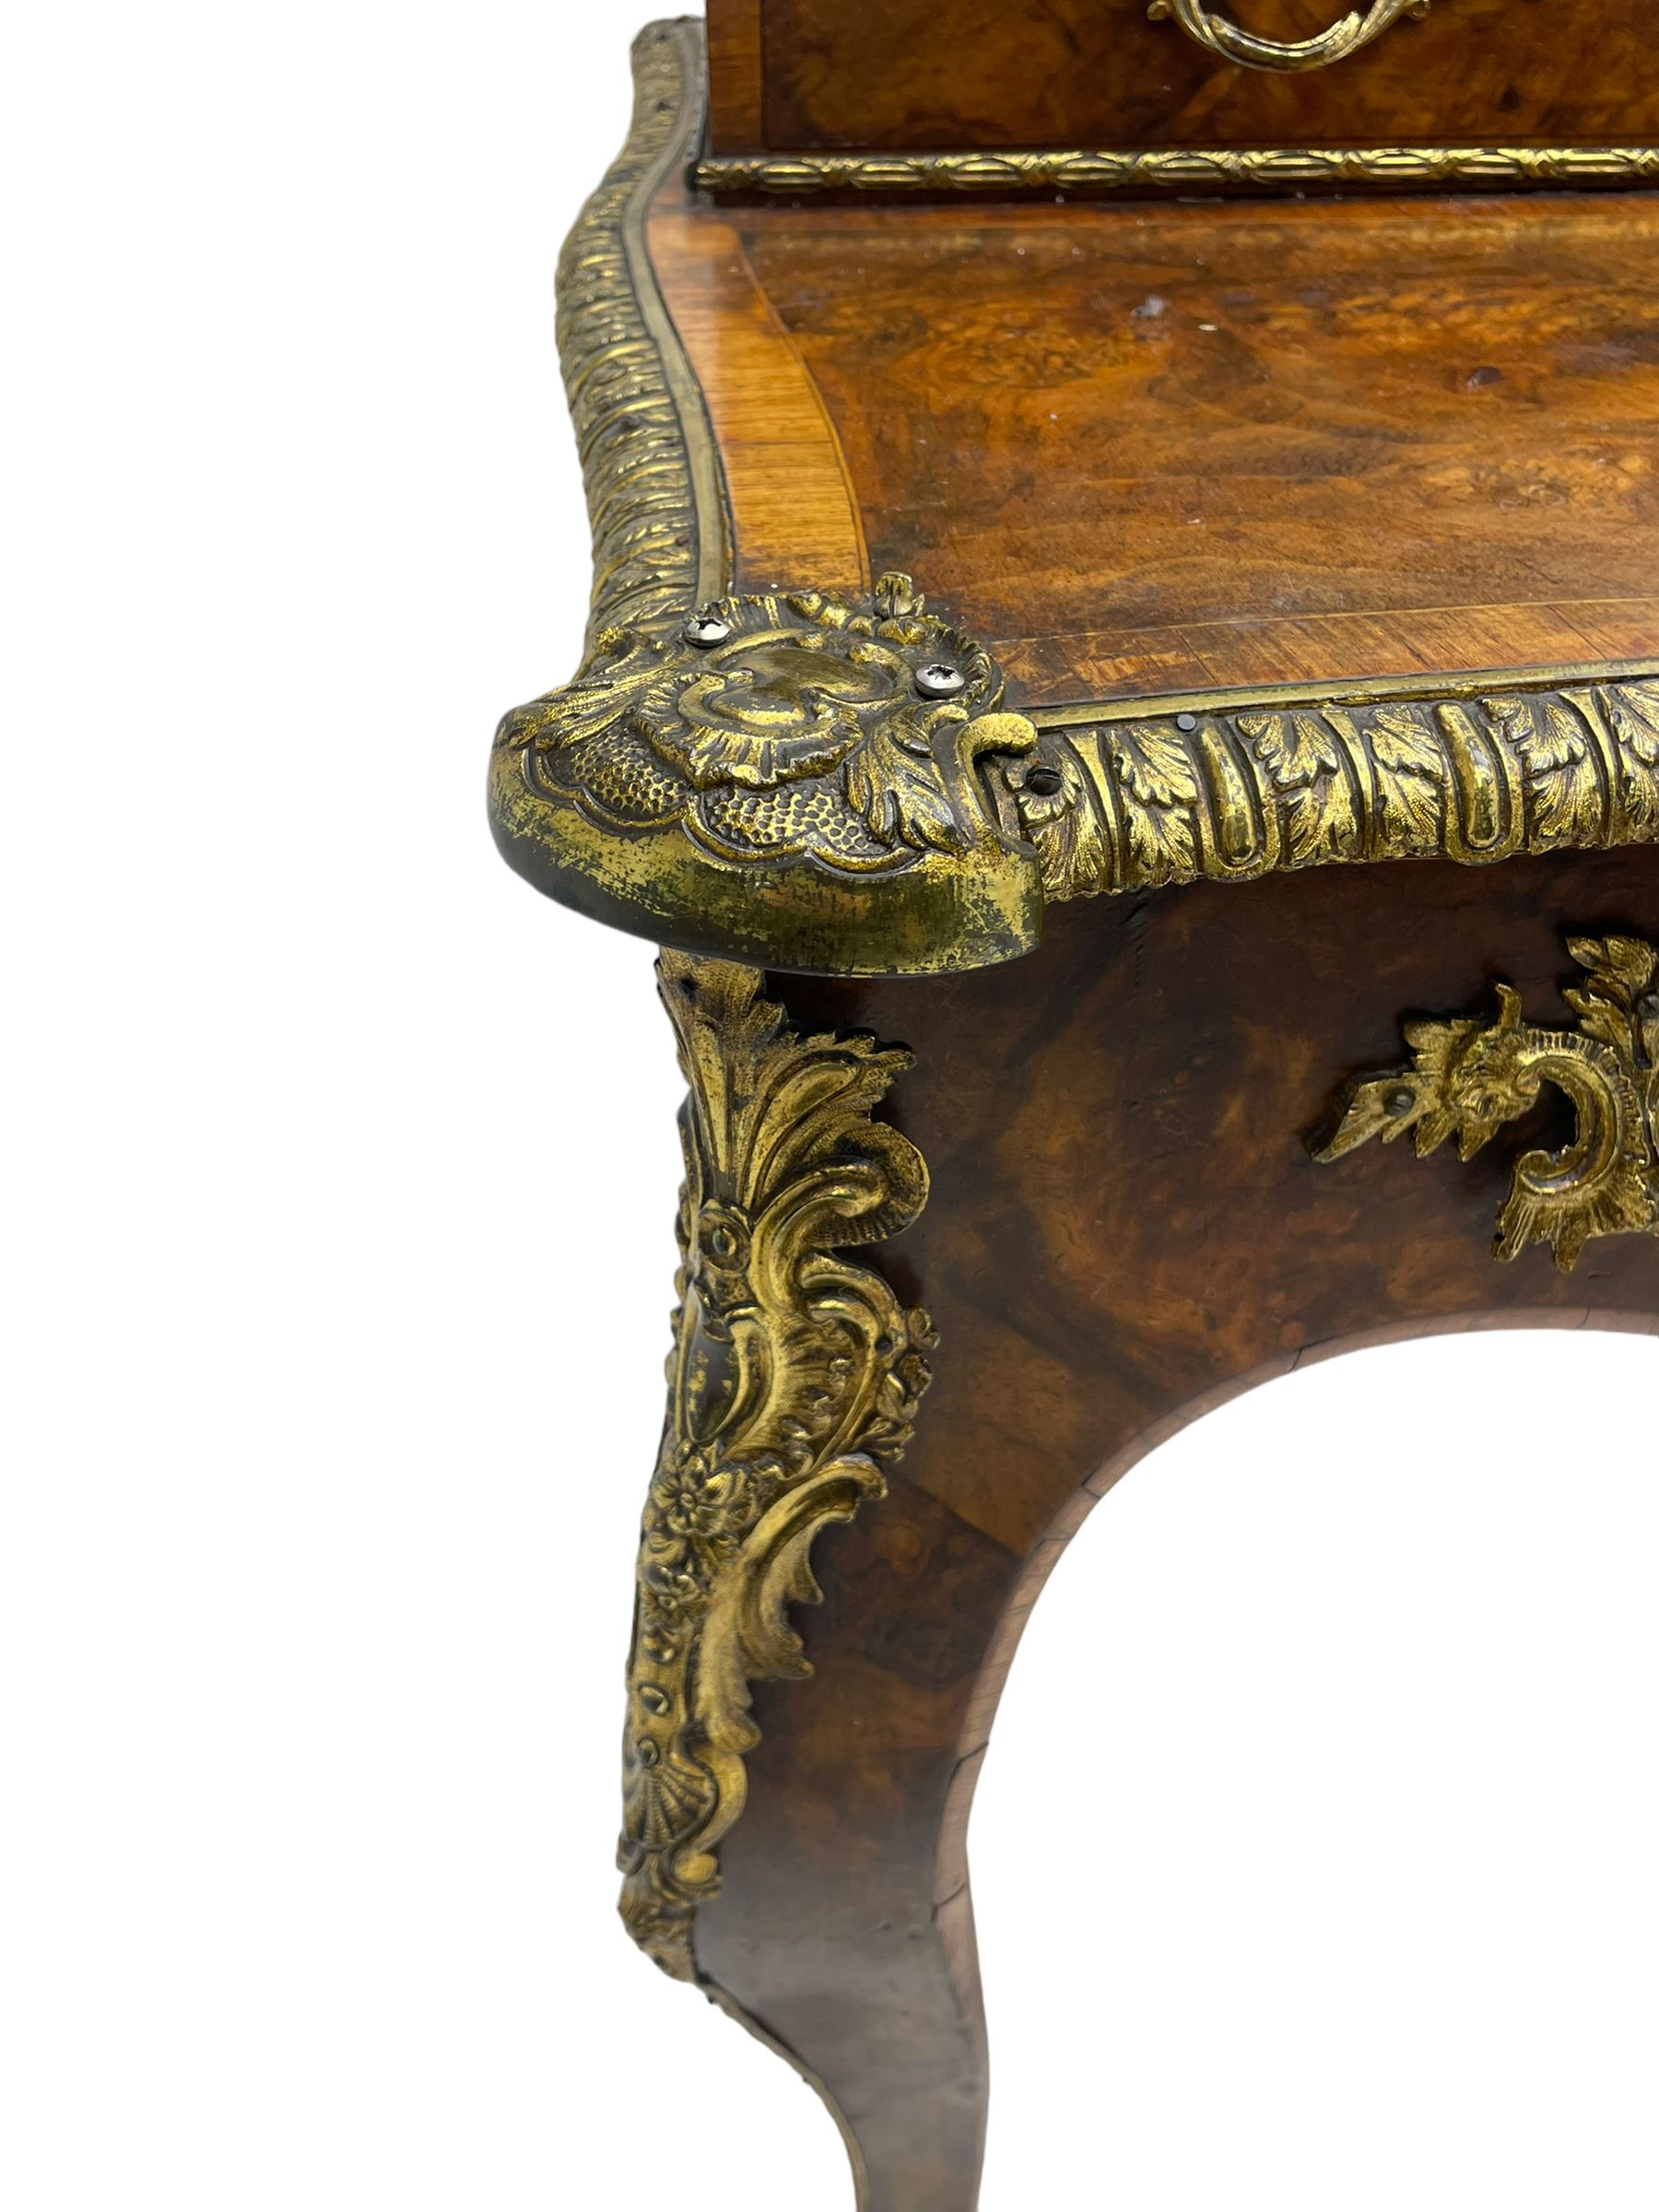 Late 19th to early 20th century French figured walnut writing desk - Image 2 of 13